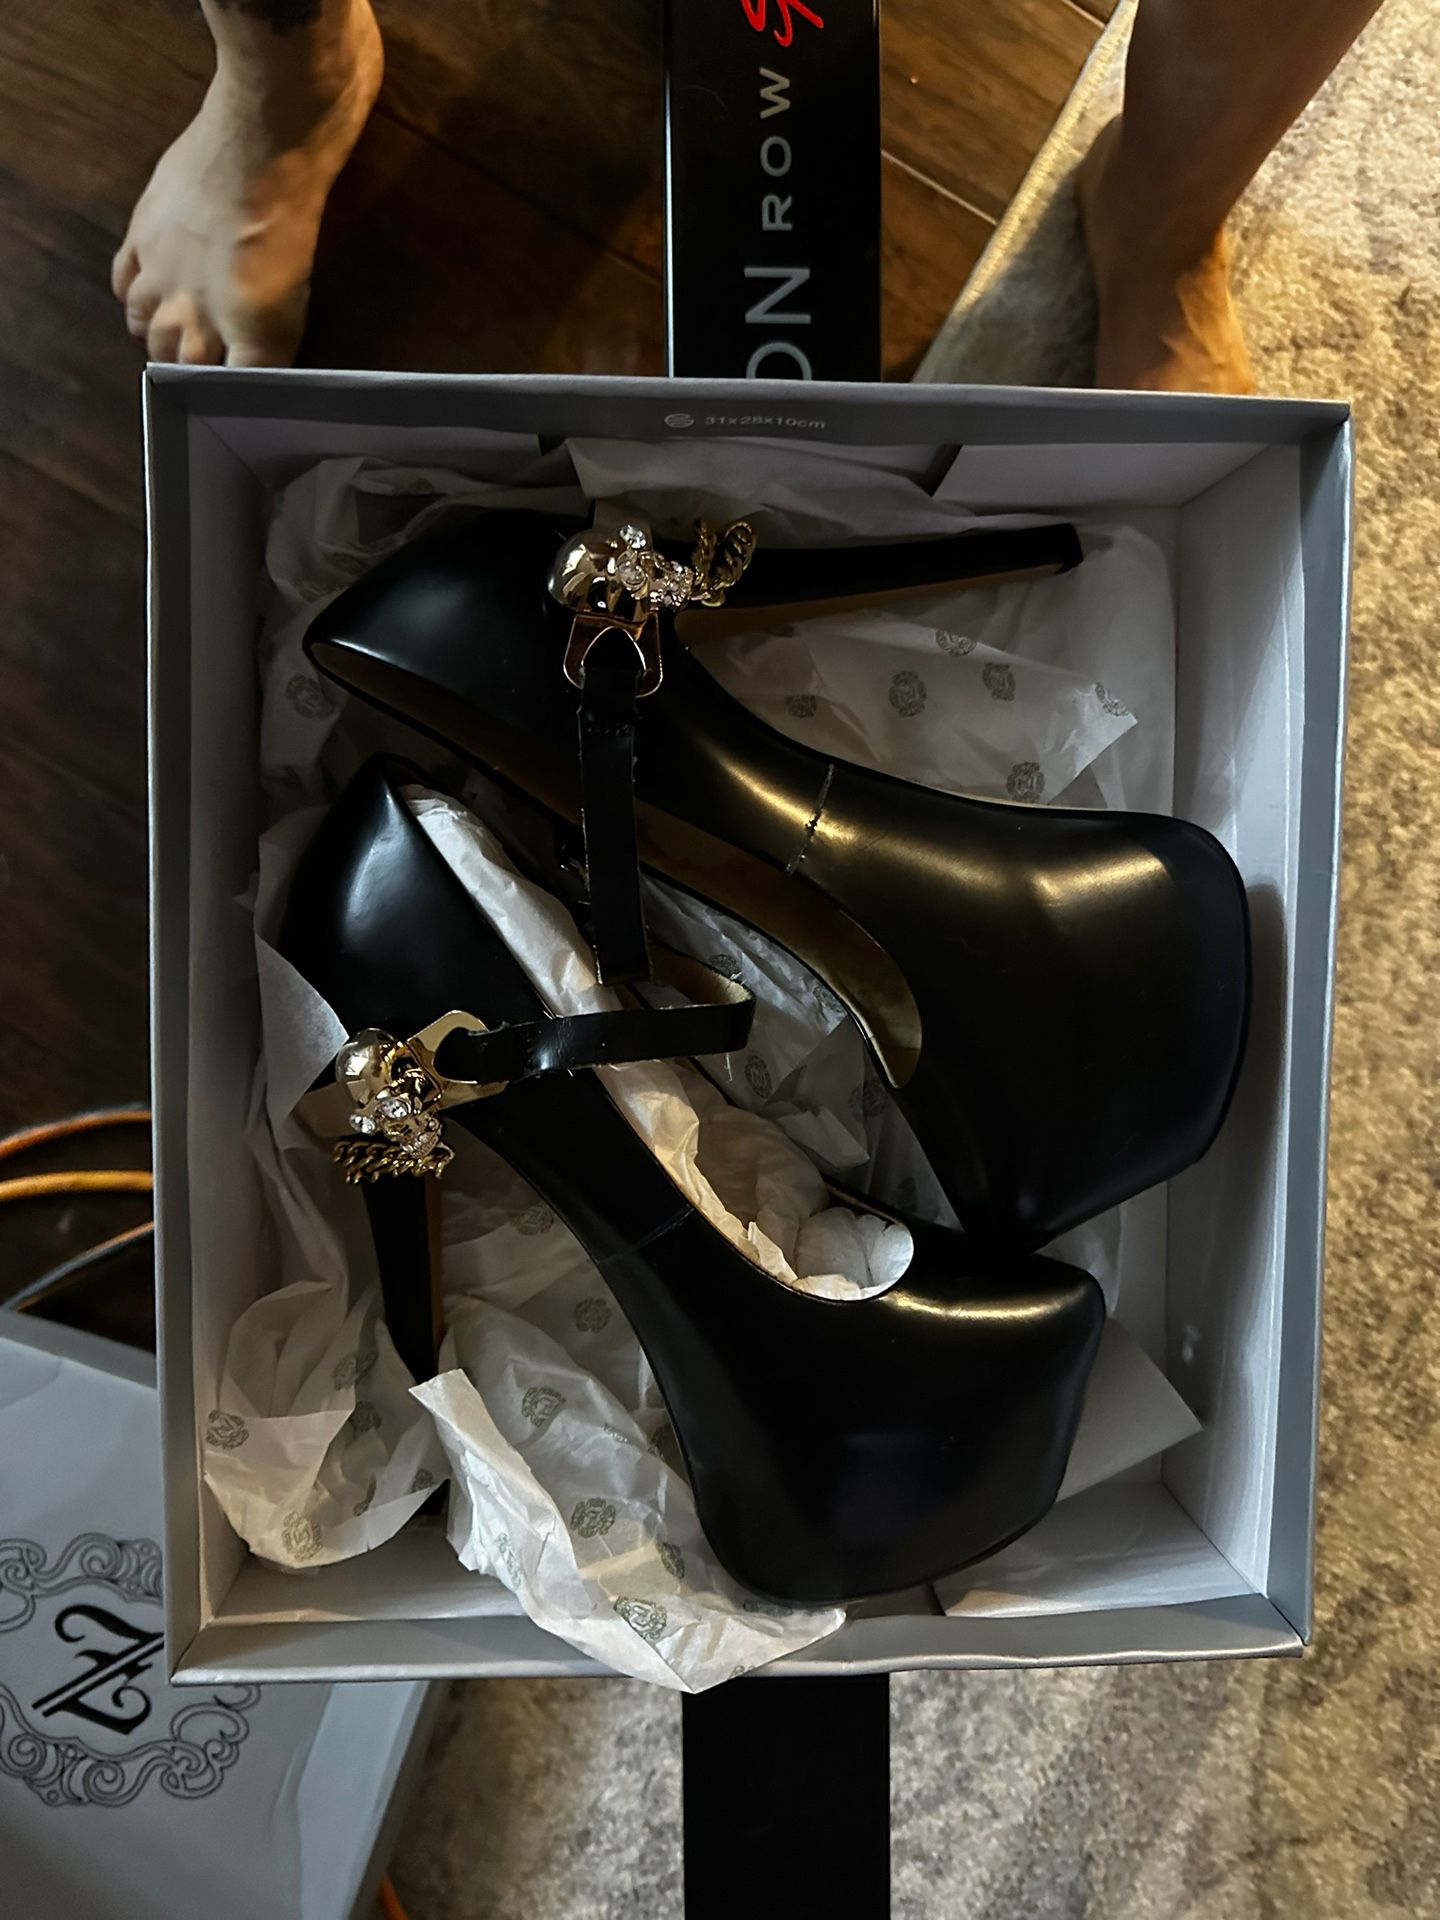 Brand New Name Brand Heels $50 A Pair New In Box